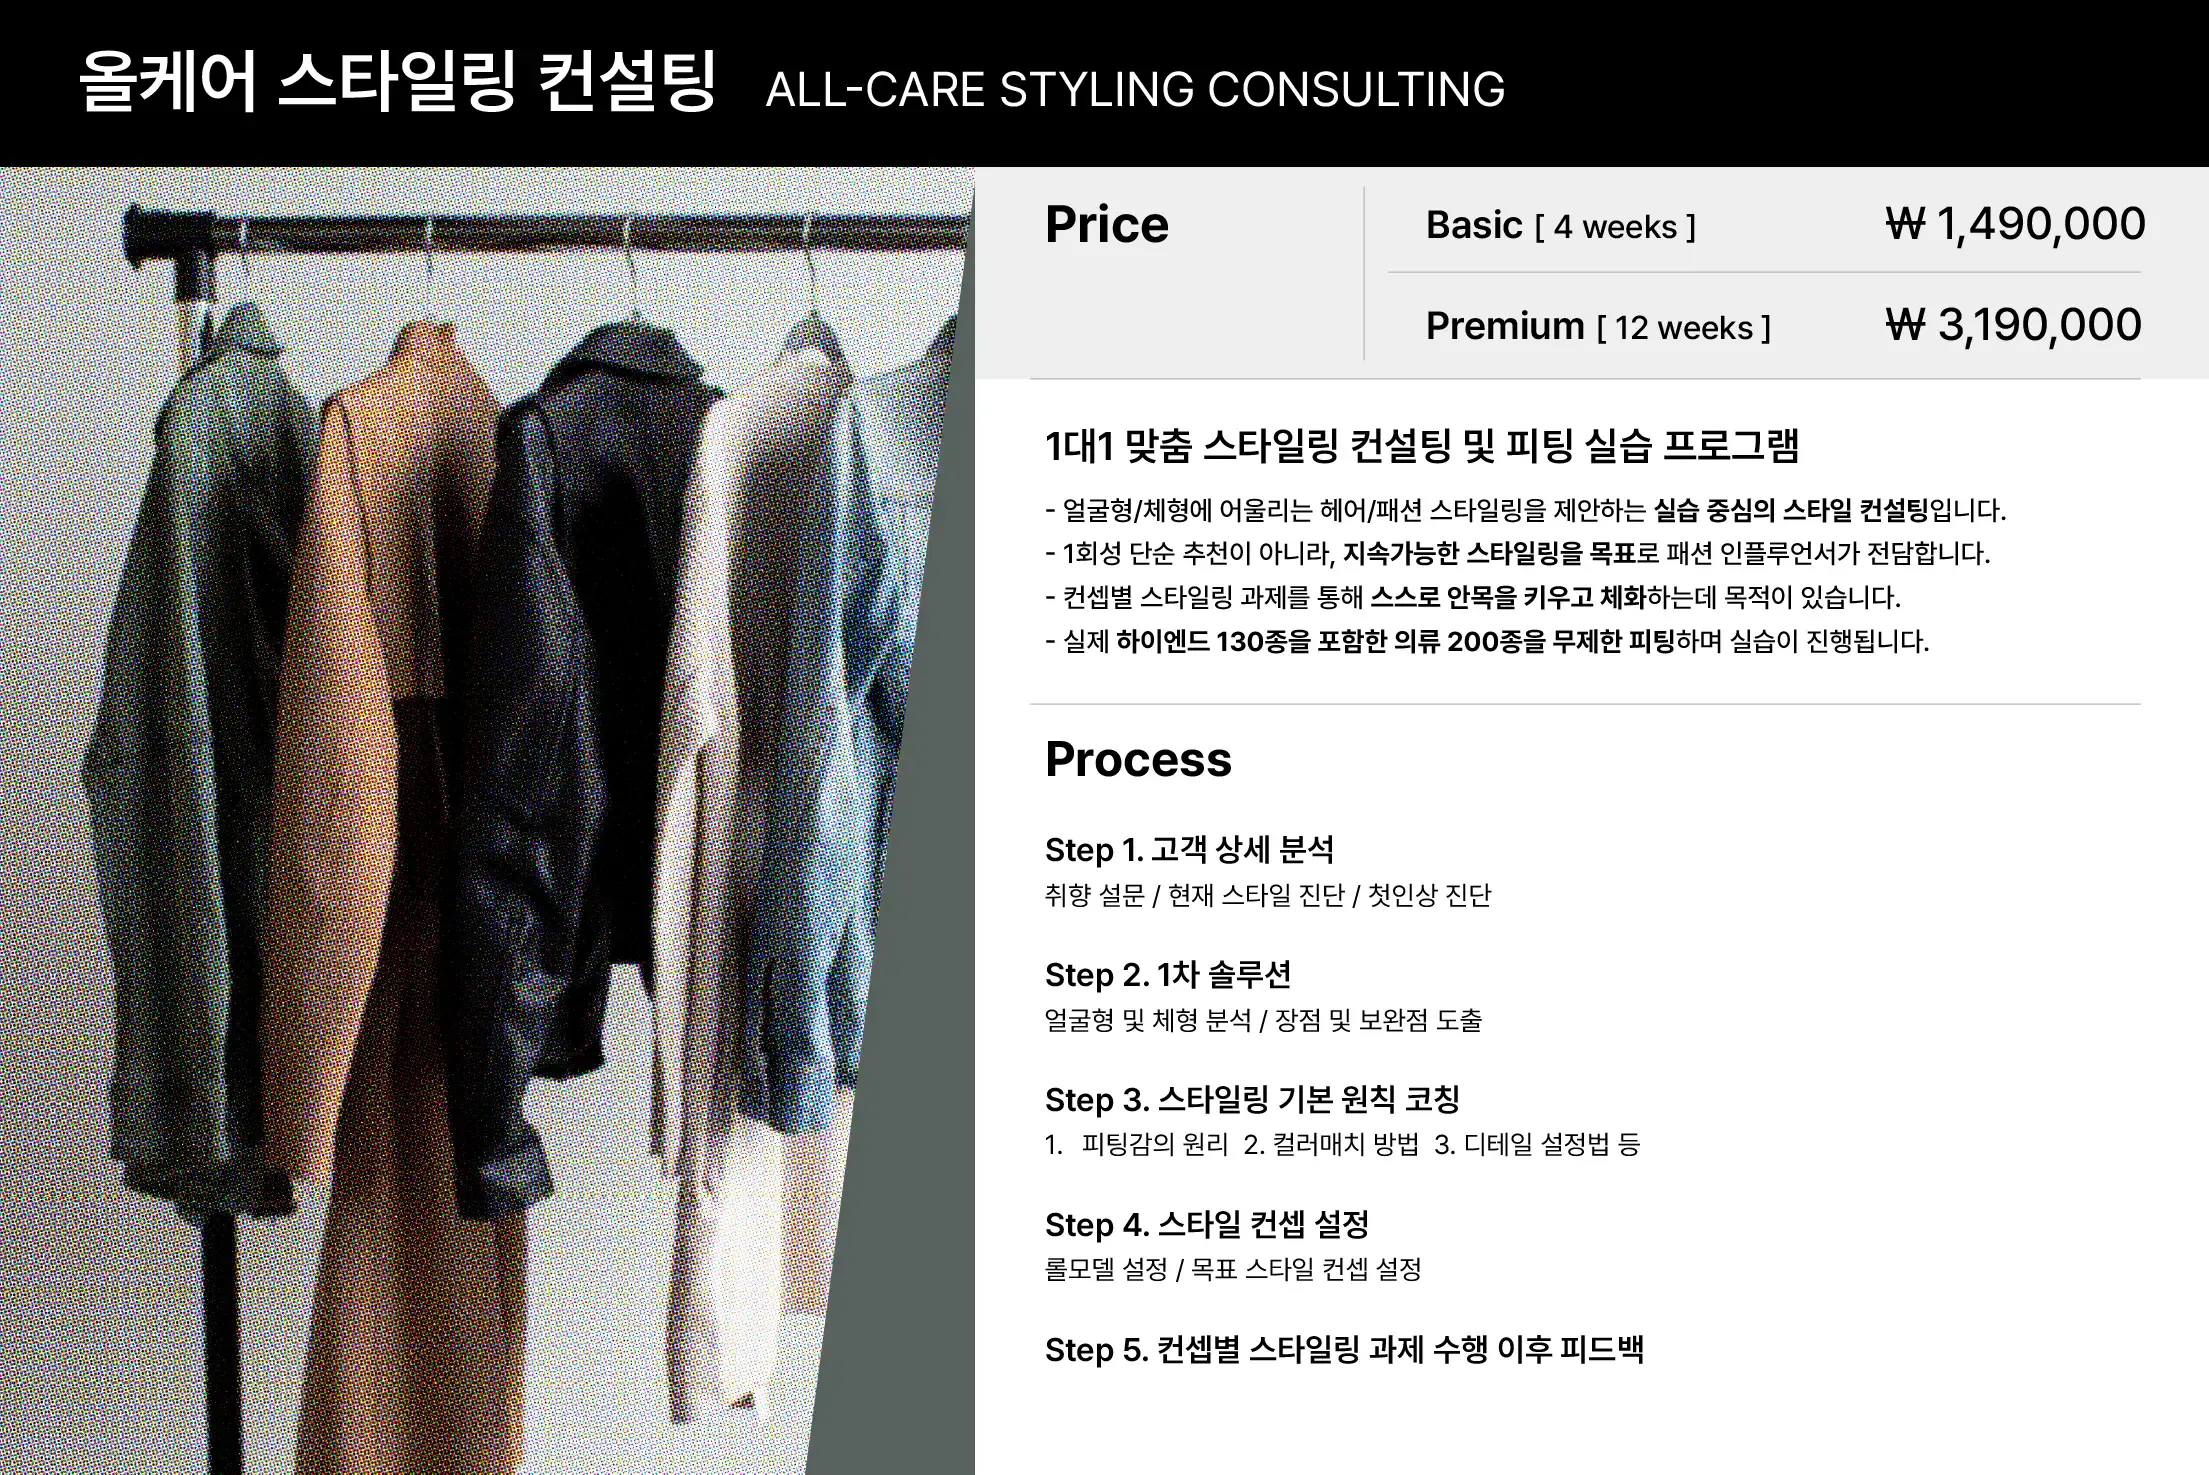 Product: Styling Consulting